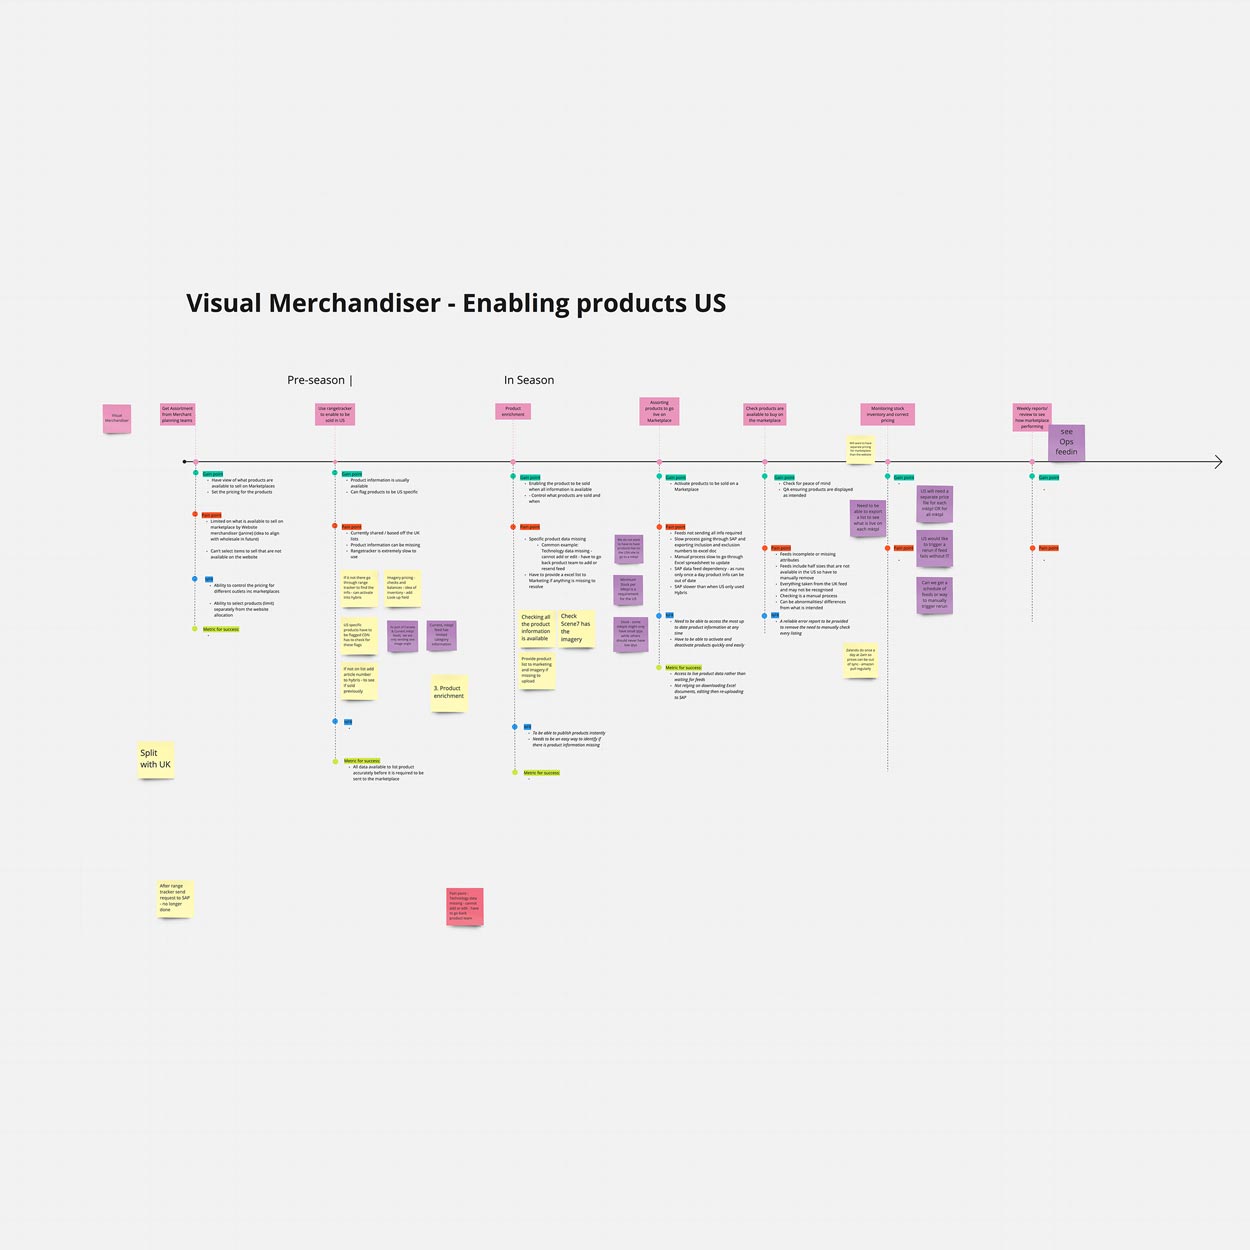 Remote workshop screen showing the mapping of the Visual merchandiser journey in the US marketplaces process. Highlighting pains and gain associated with every step to build requirements from.